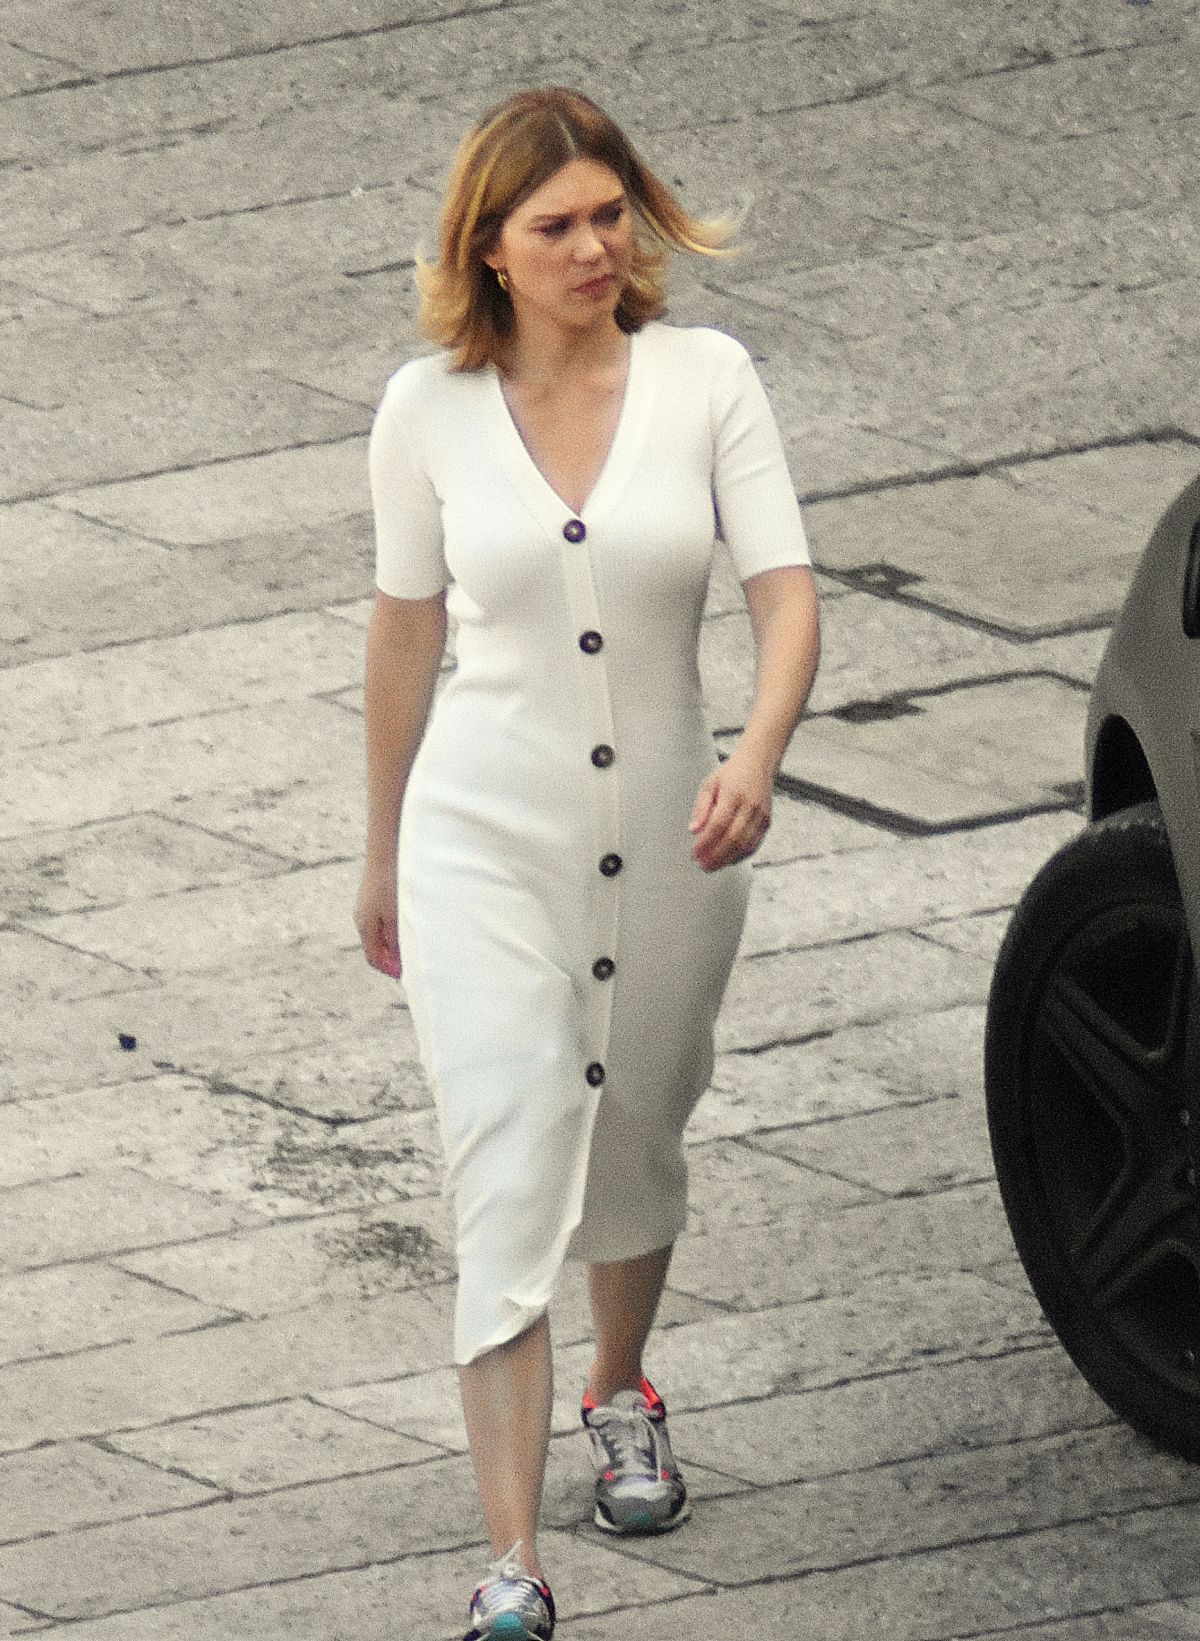 Lea Seydoux On The Set Of No Time To Die New James Bond Movie In Matera 09 15 2019 Hawtcelebs